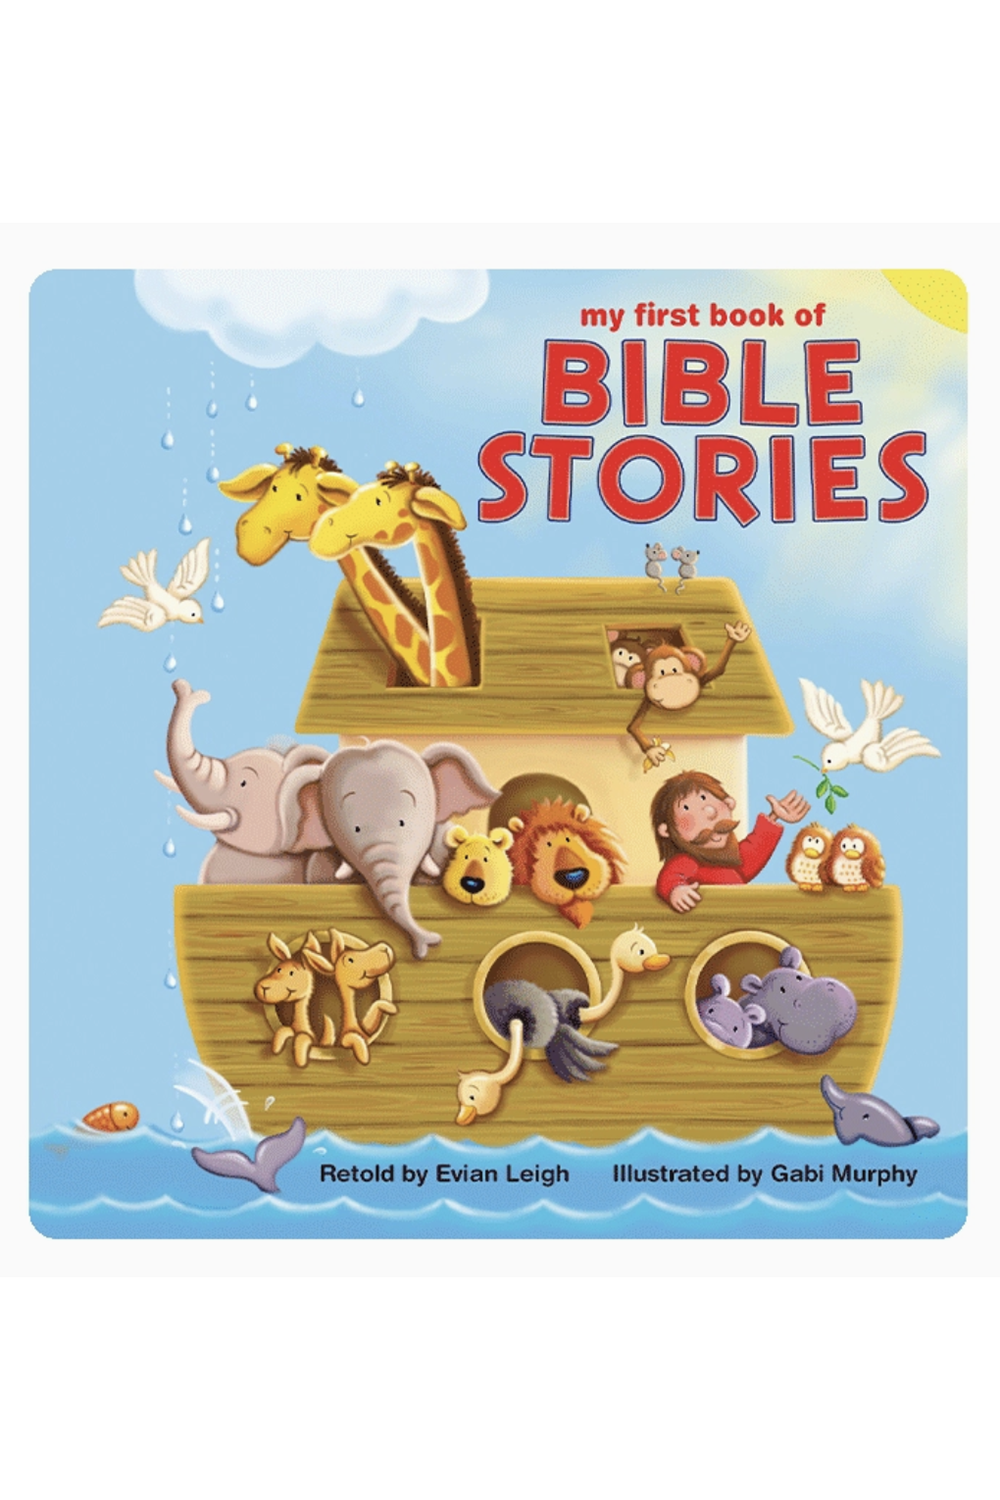 My First Book of Bible Stories